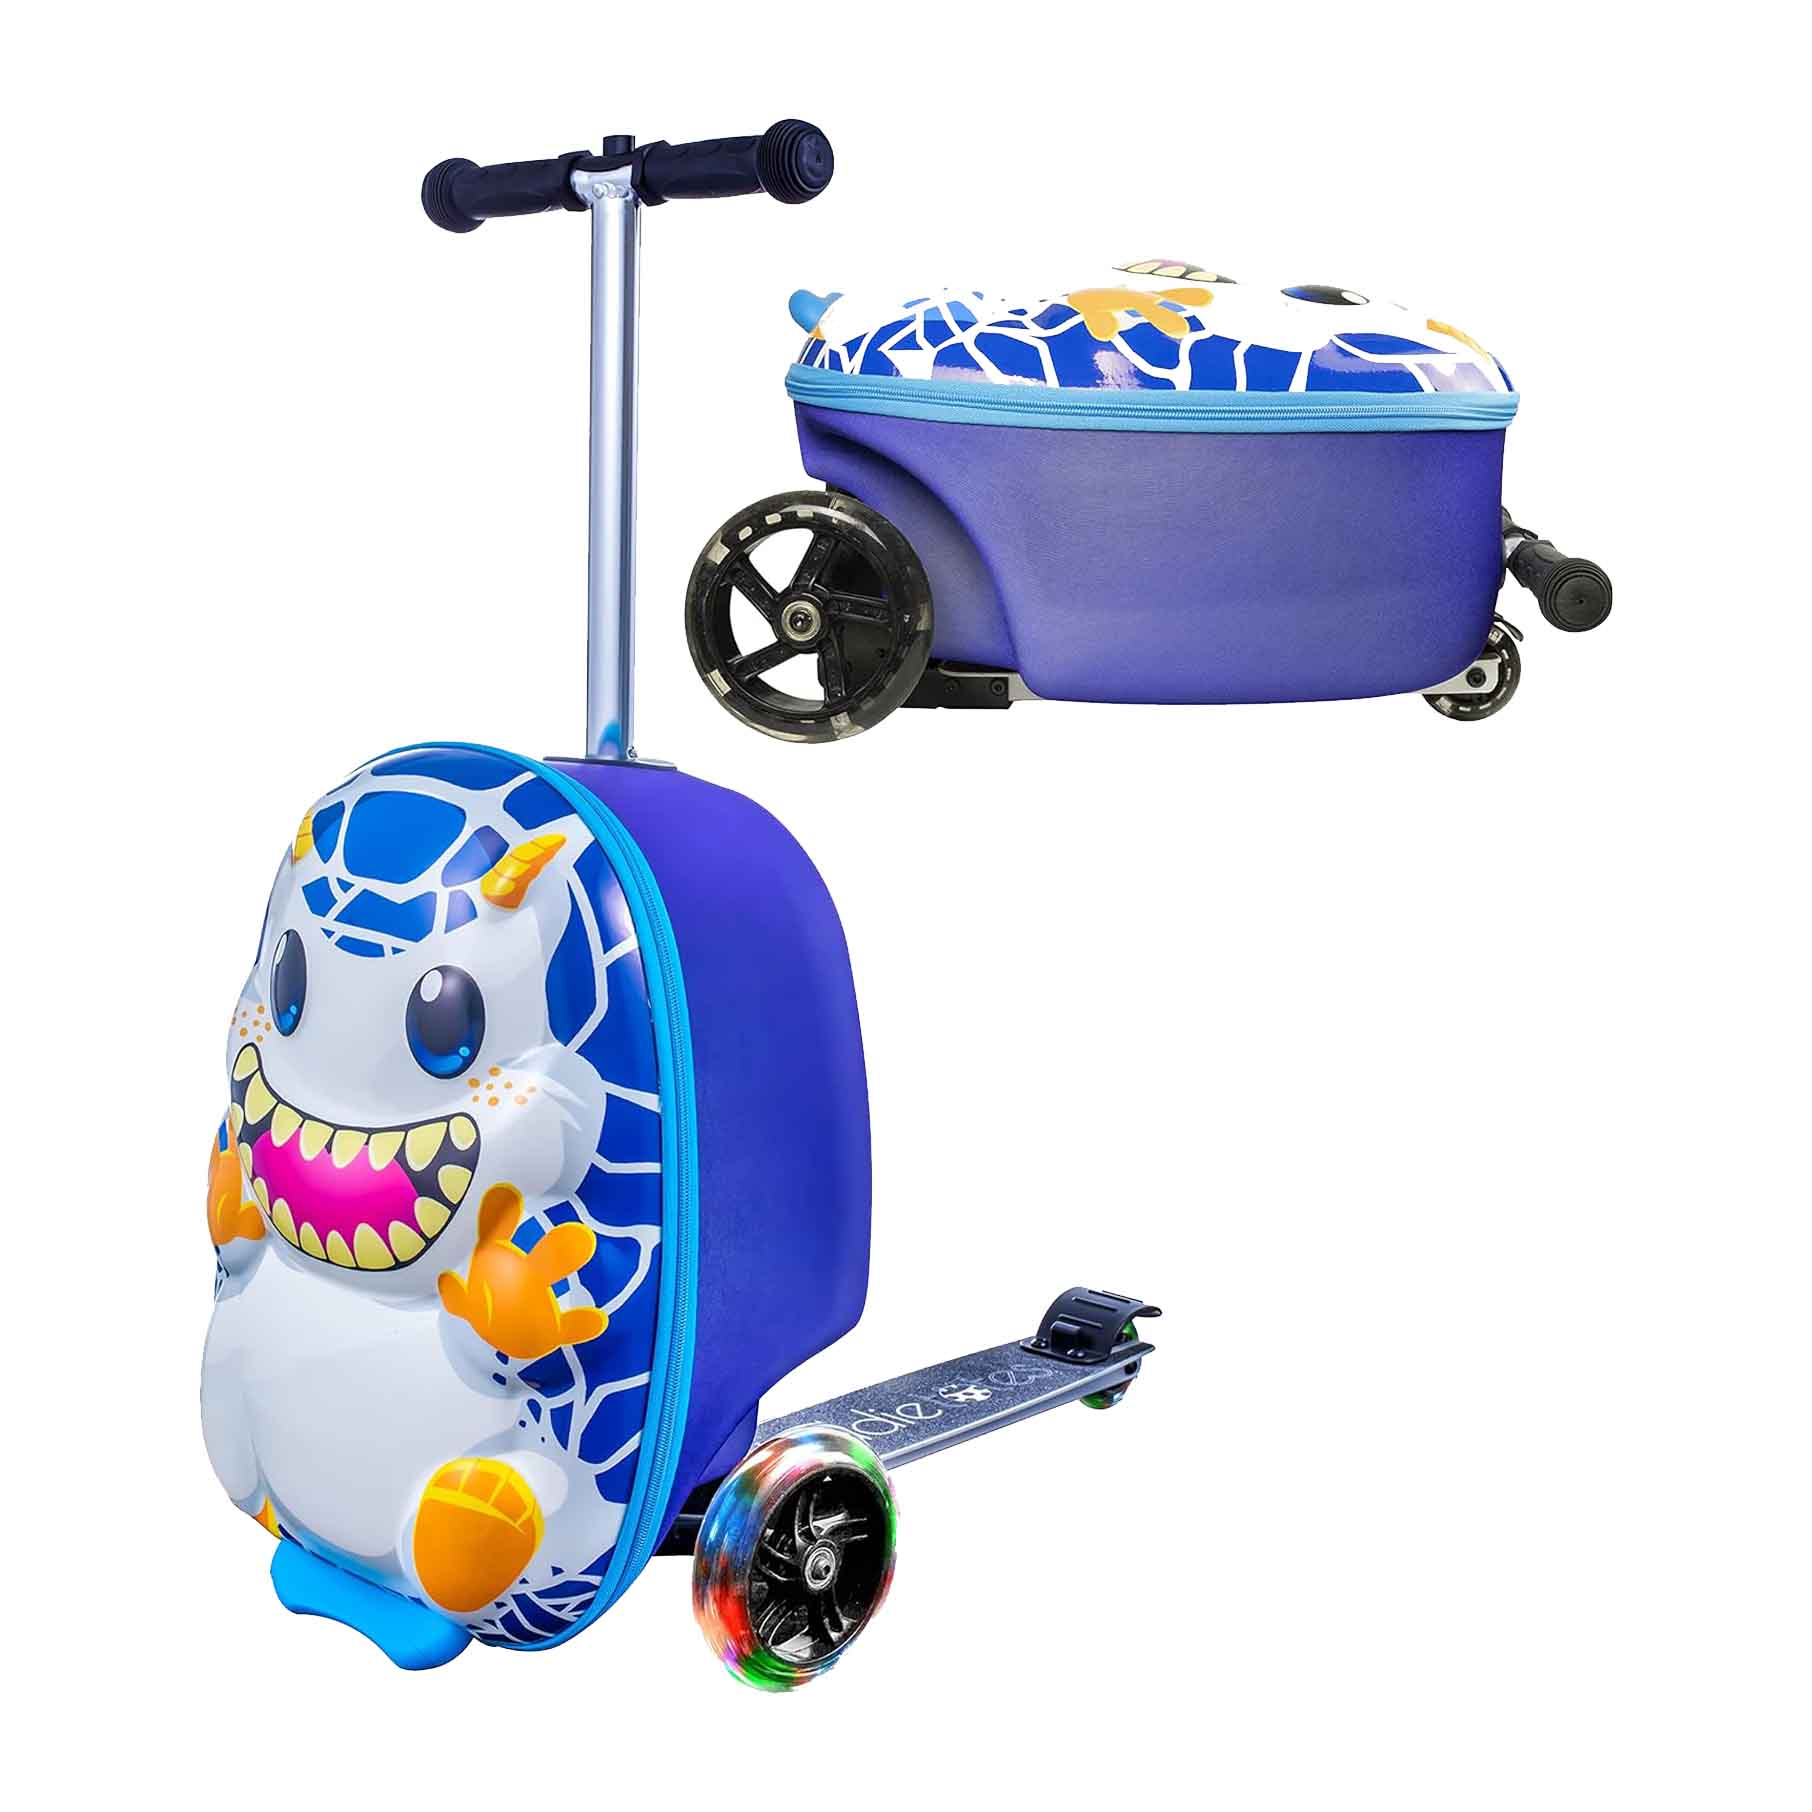 Kiddietotes Kids' Hardside Carry On Suitcase Scooter with a yeti monster design